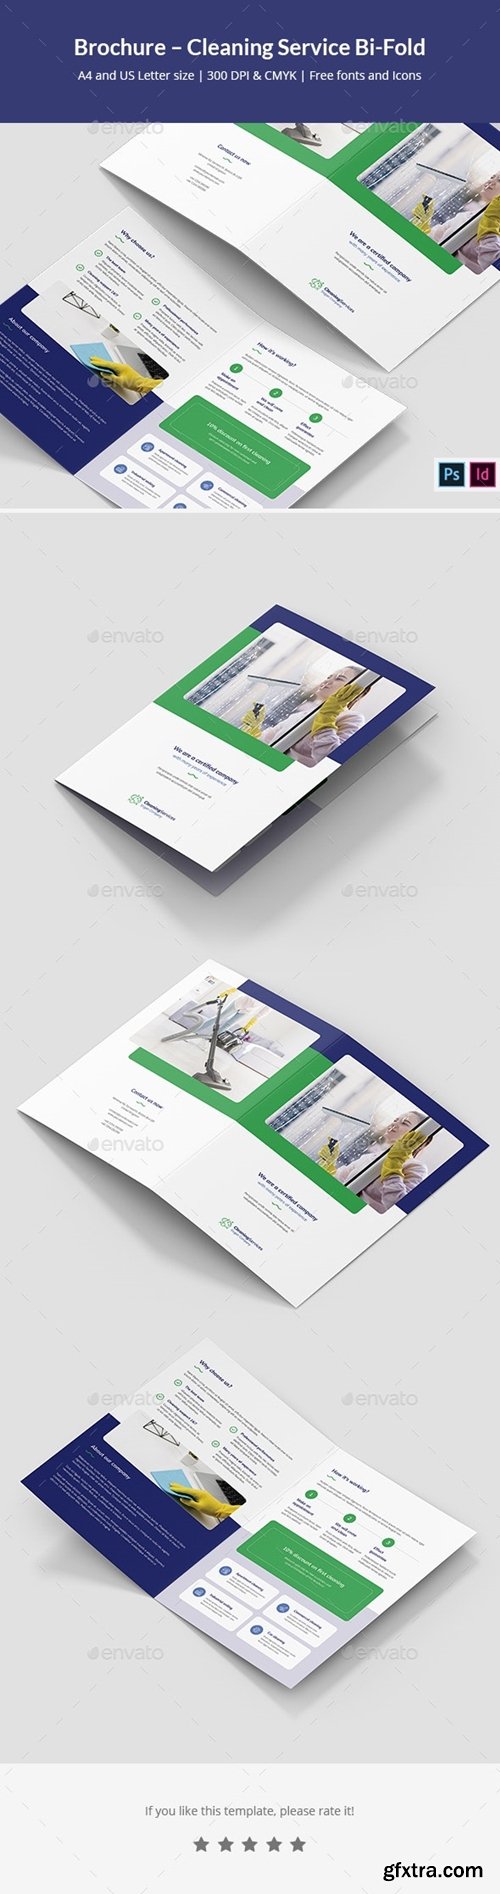 GraphicRiver - Brochure – Cleaning Service Bi-Fold 25570076